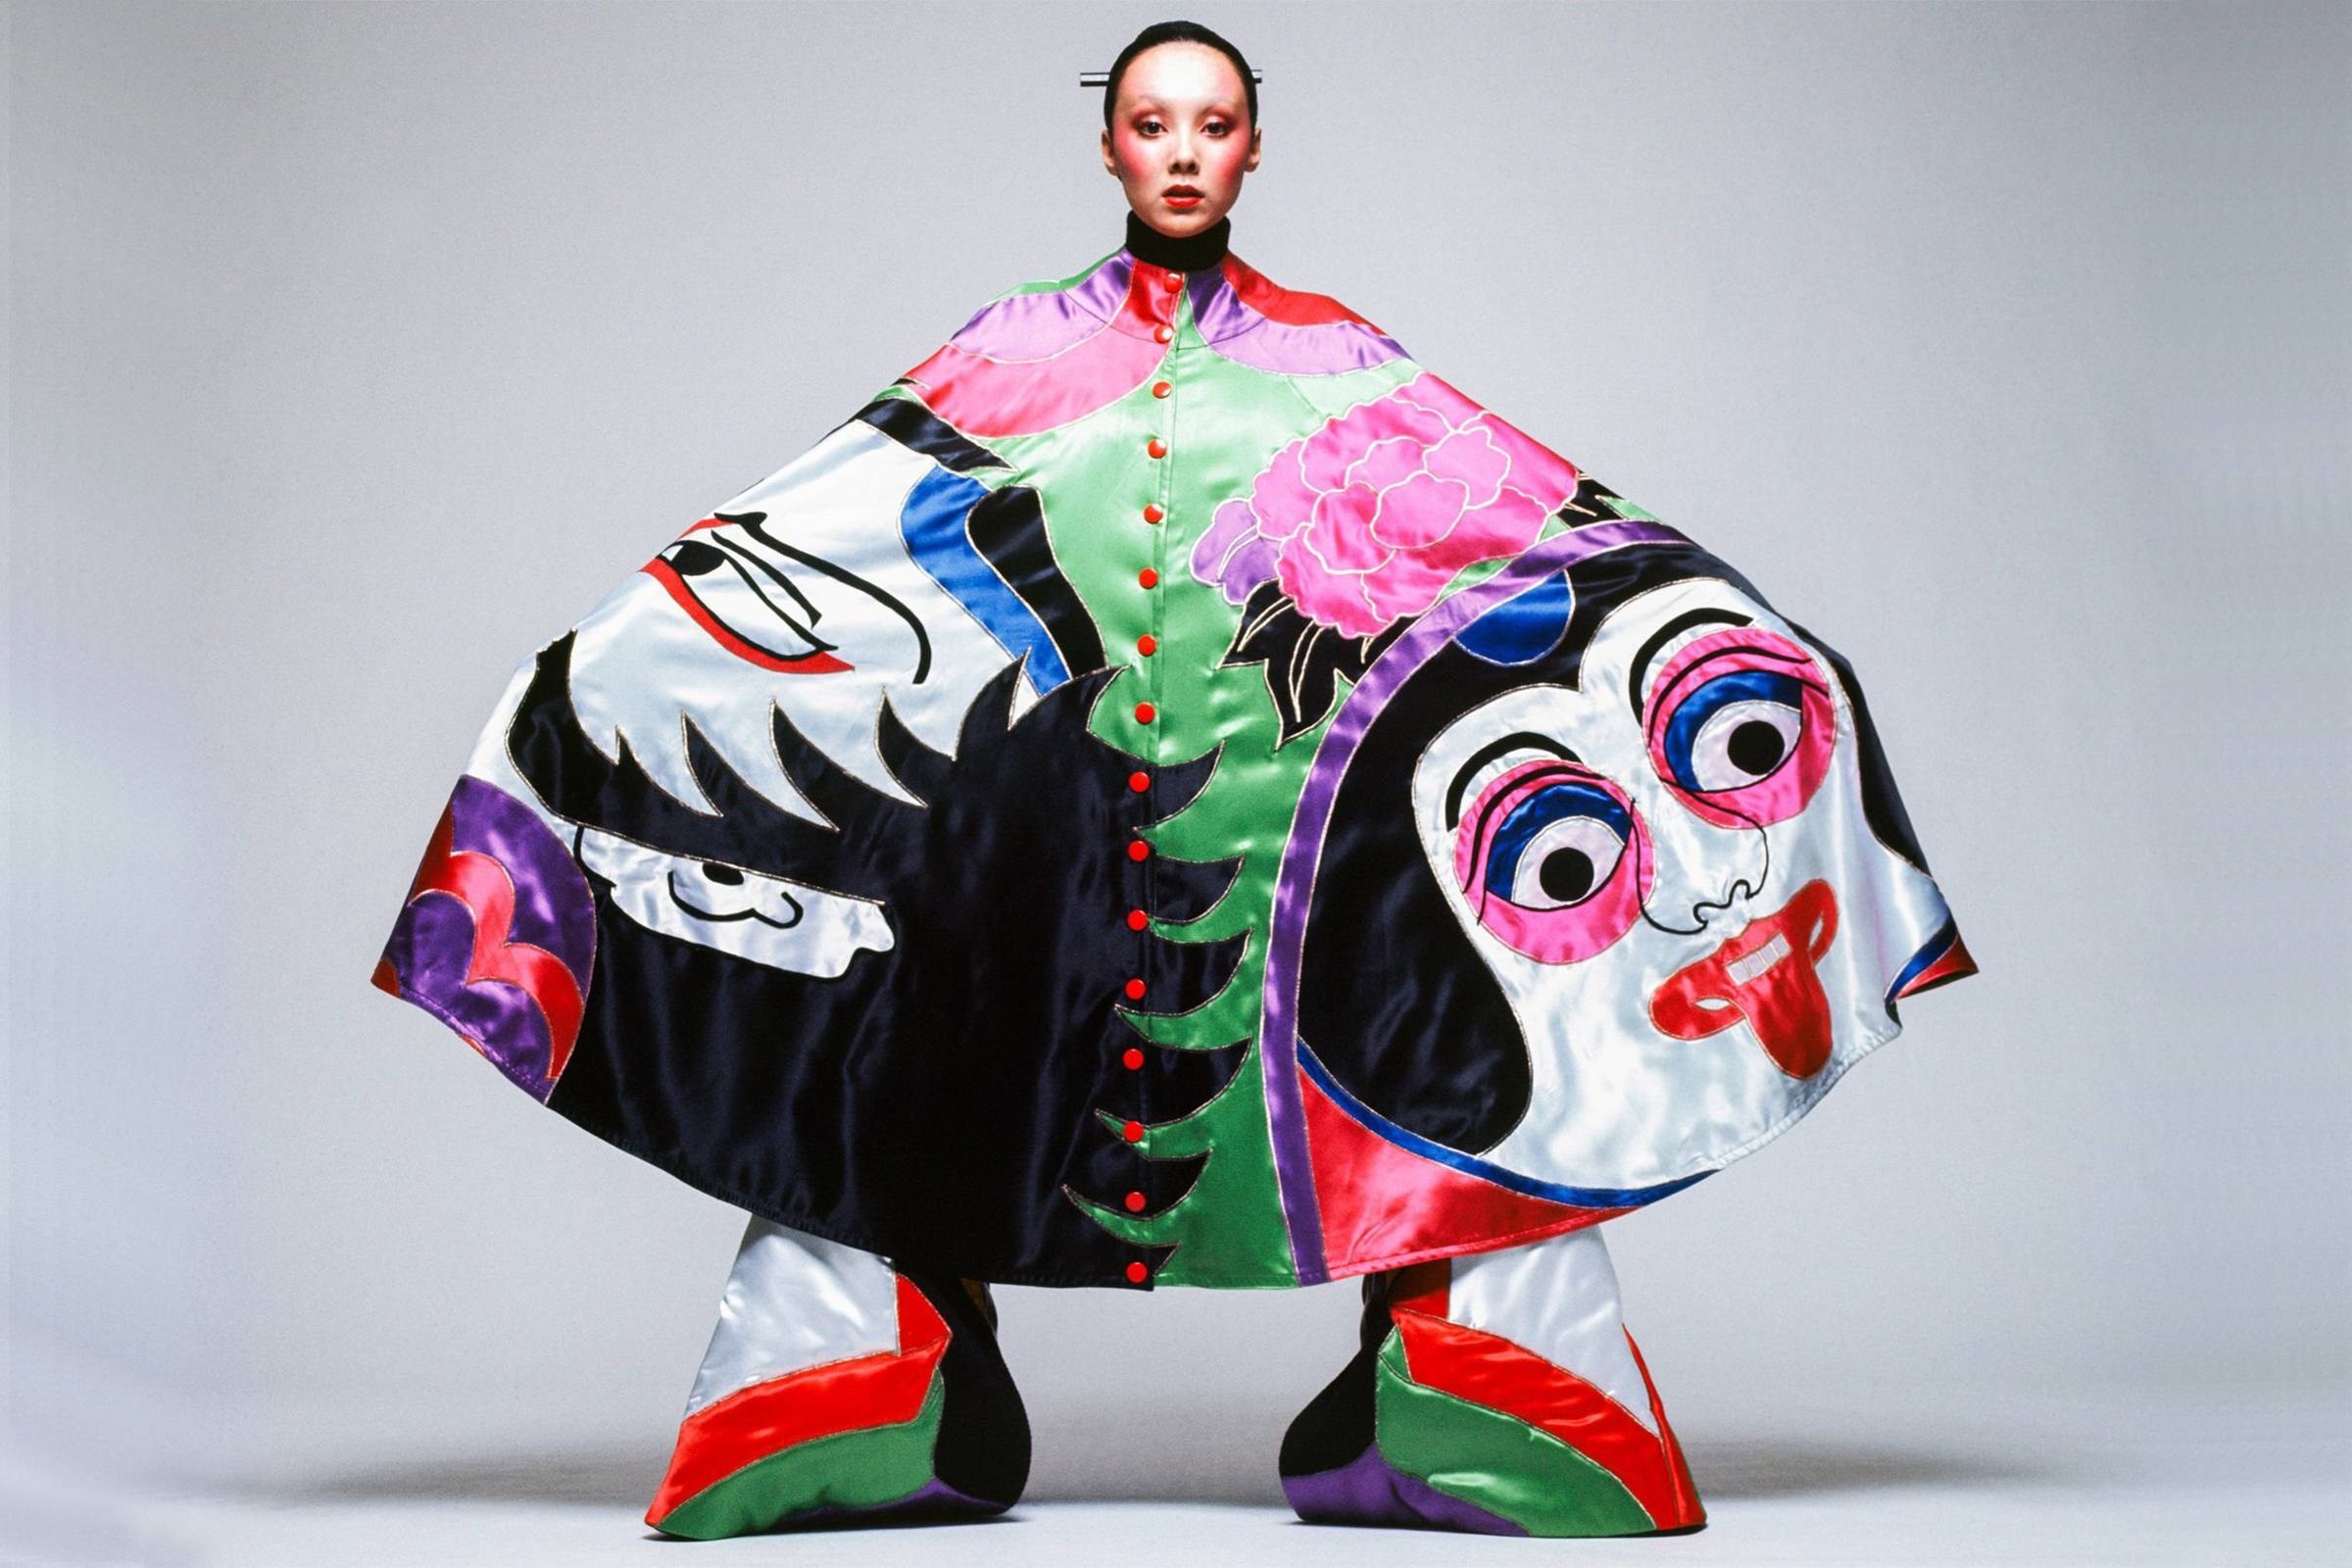 Creative Fashion Designs by Kansai Yamamoto in the Early 1970s » Design You  Trust